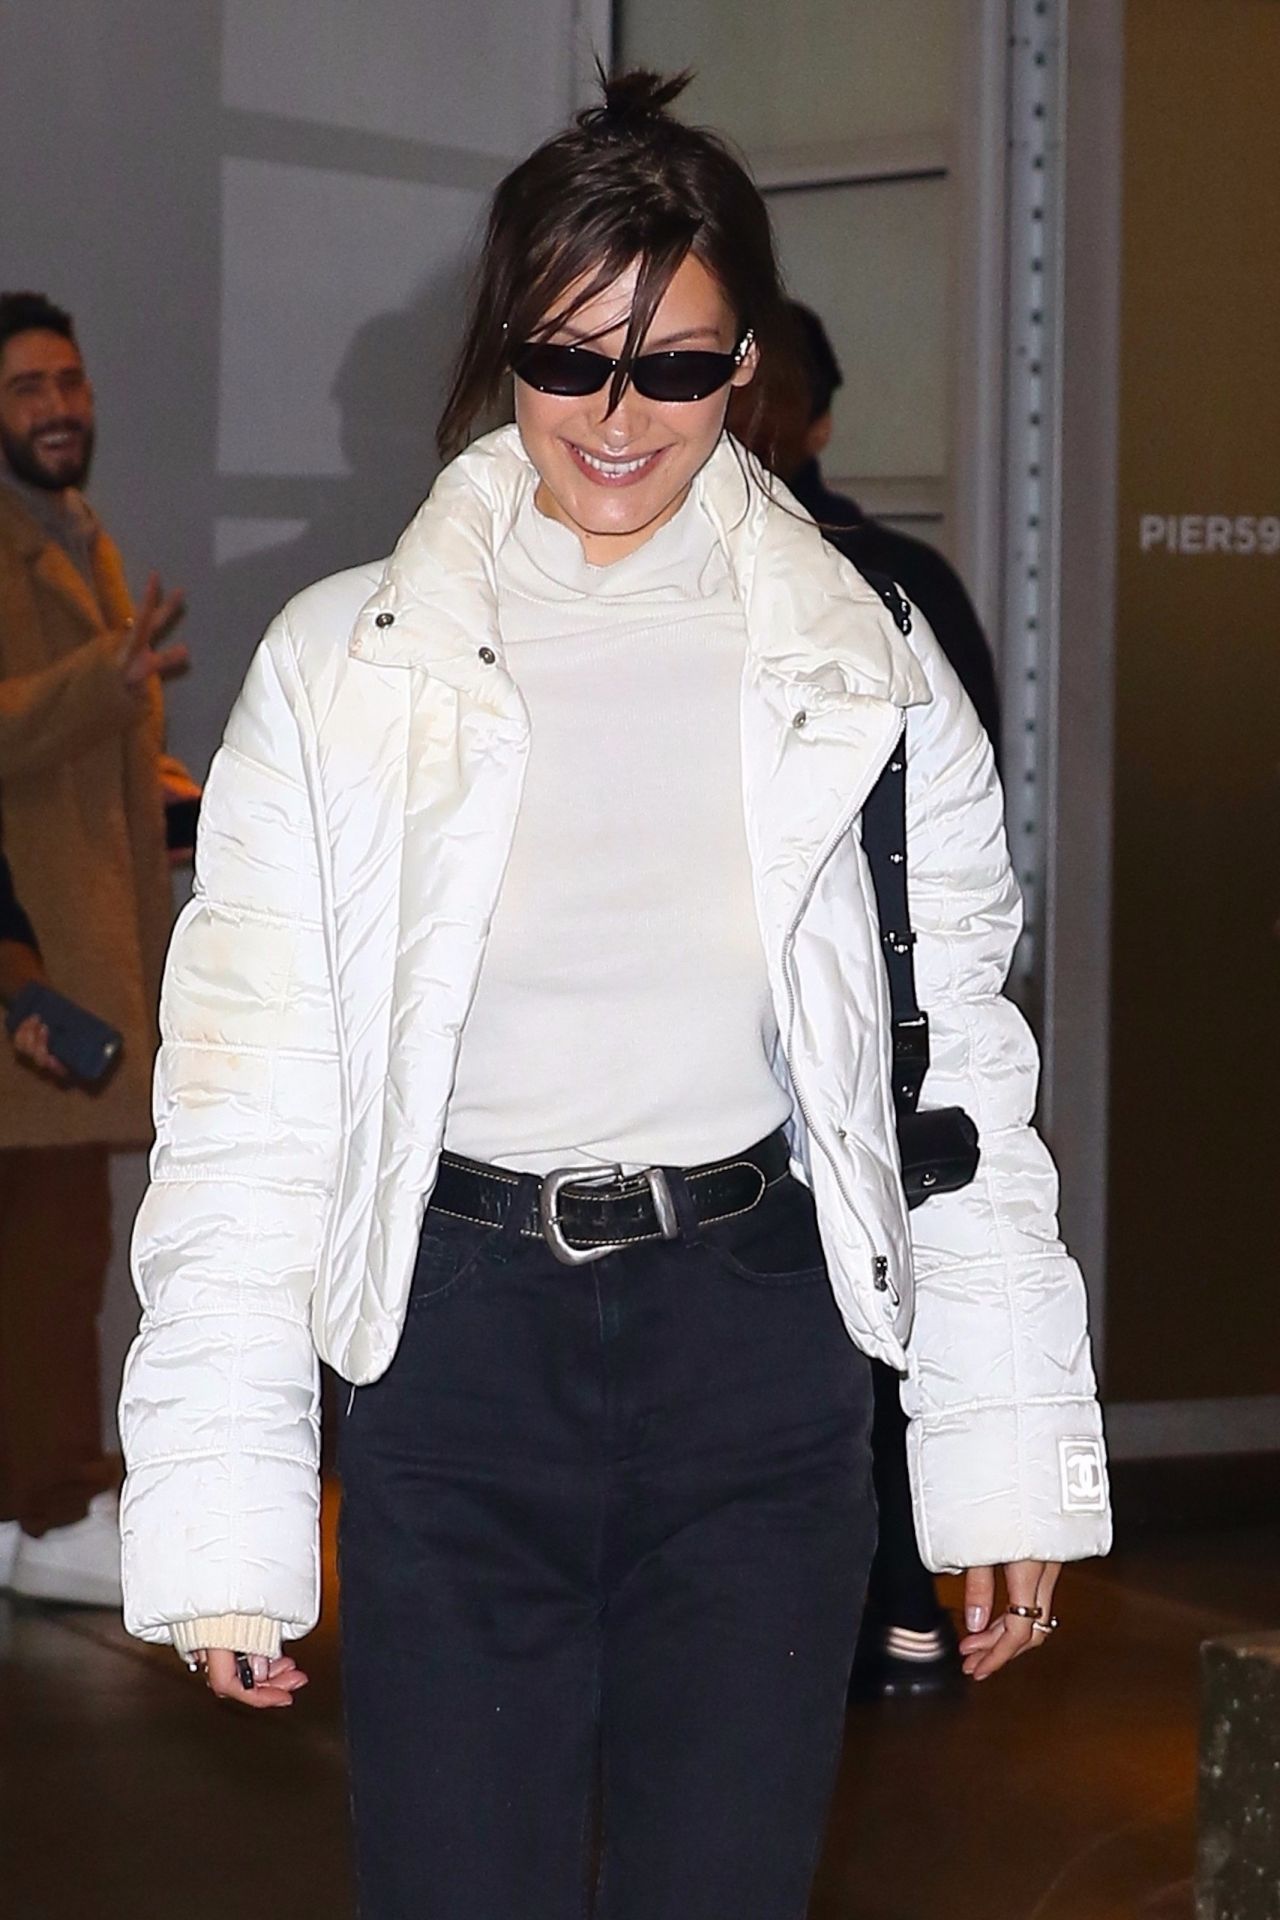 bella-hadid-out-in-nyc-10-22-2018-0.jpg